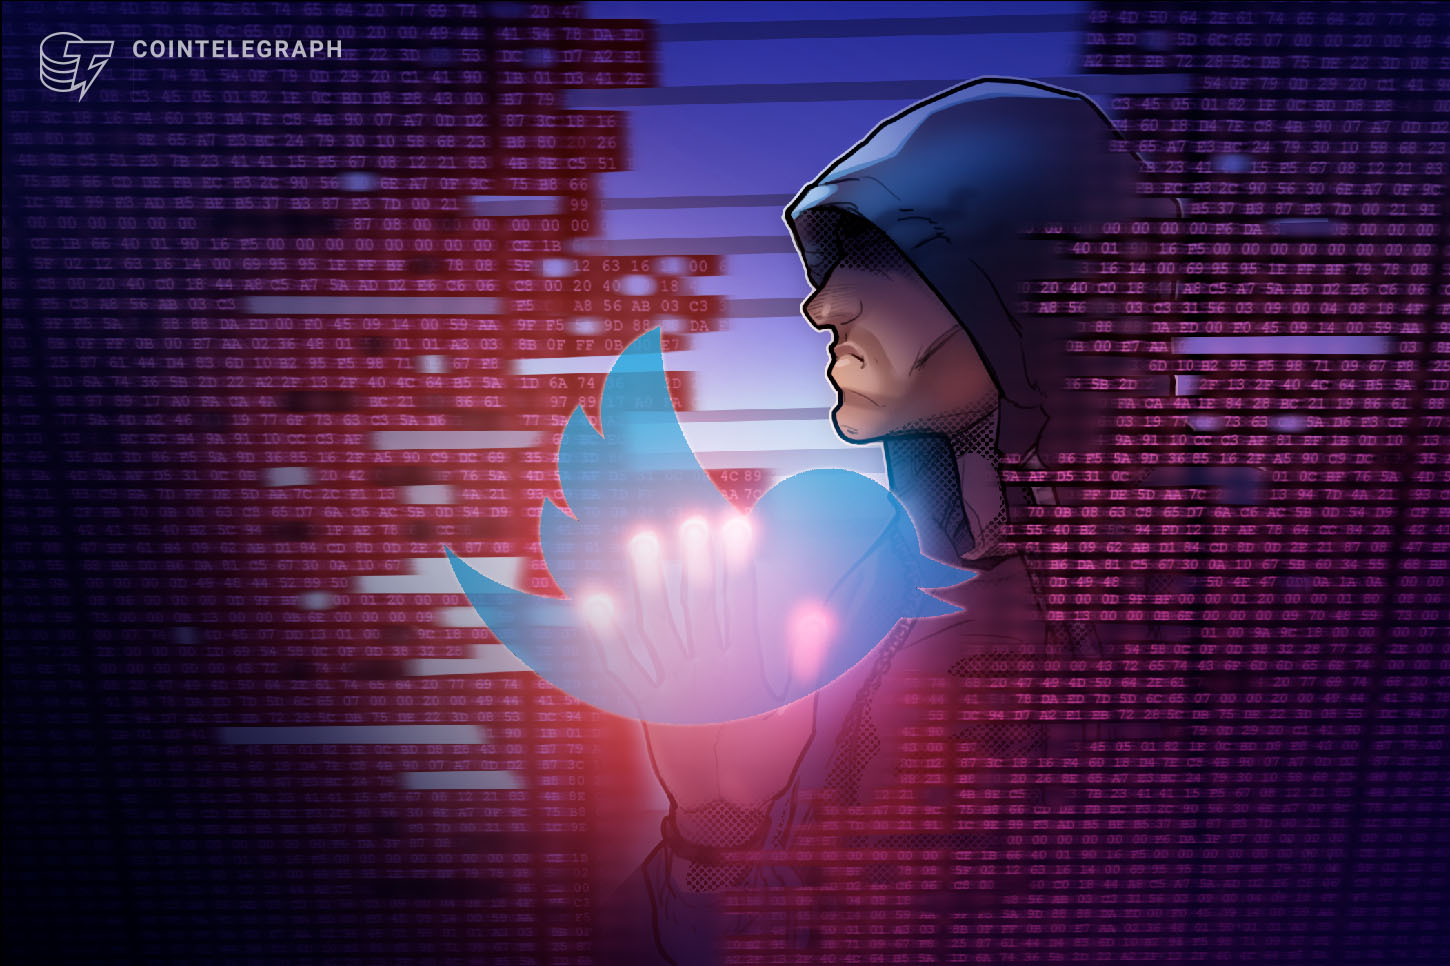 Alleged second teen mastermind behind Twitter’s ‘Bitcoin giveaway’ hack